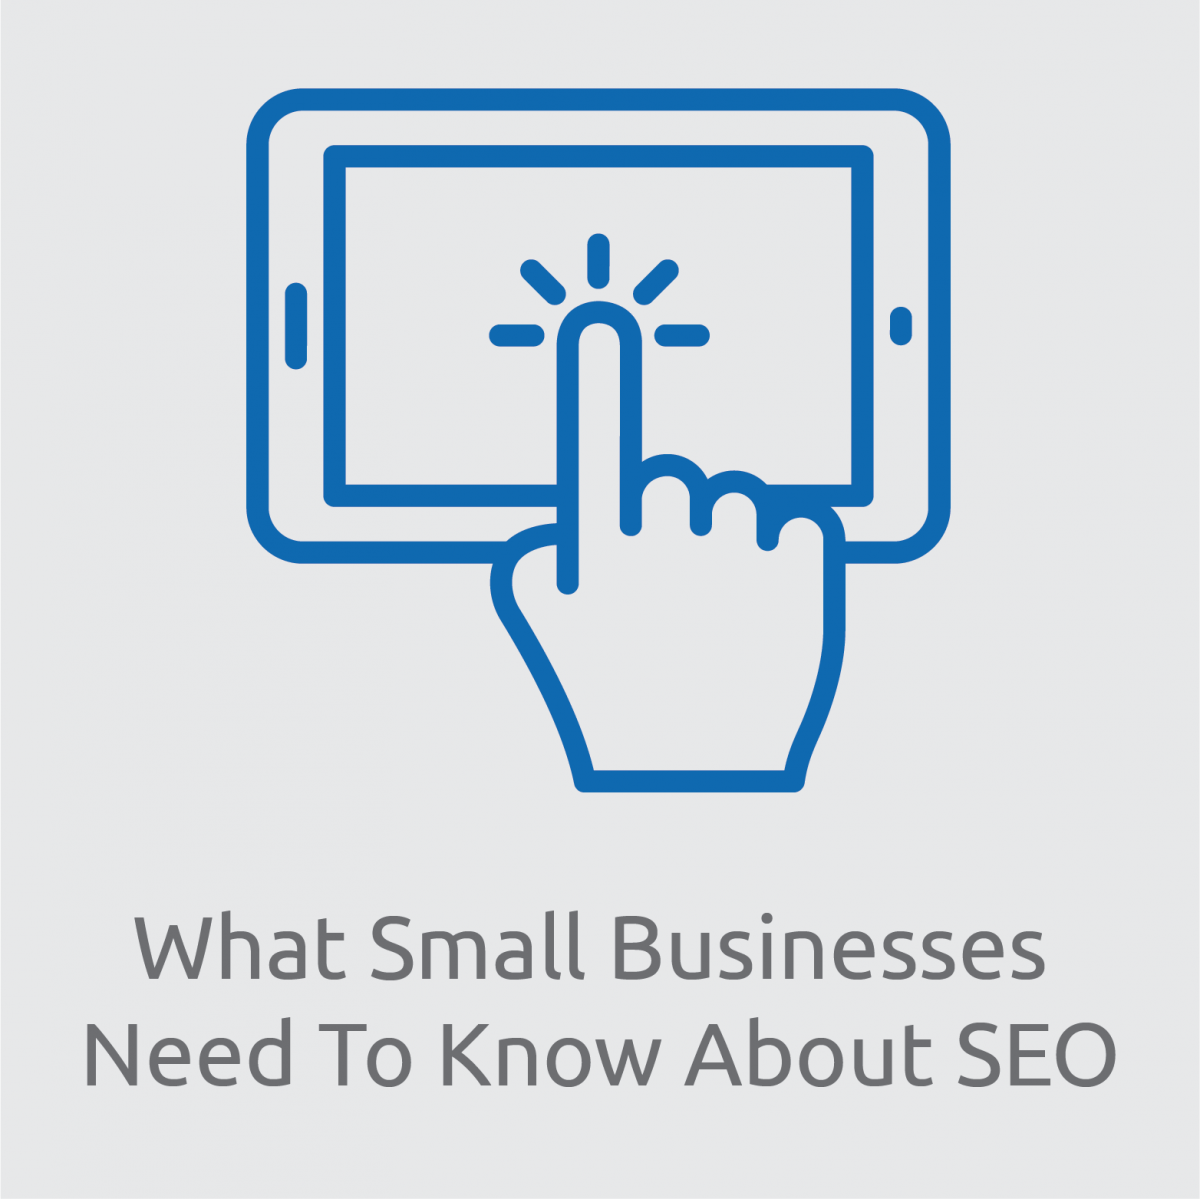 What Small Businesses Need to KNow About SEO